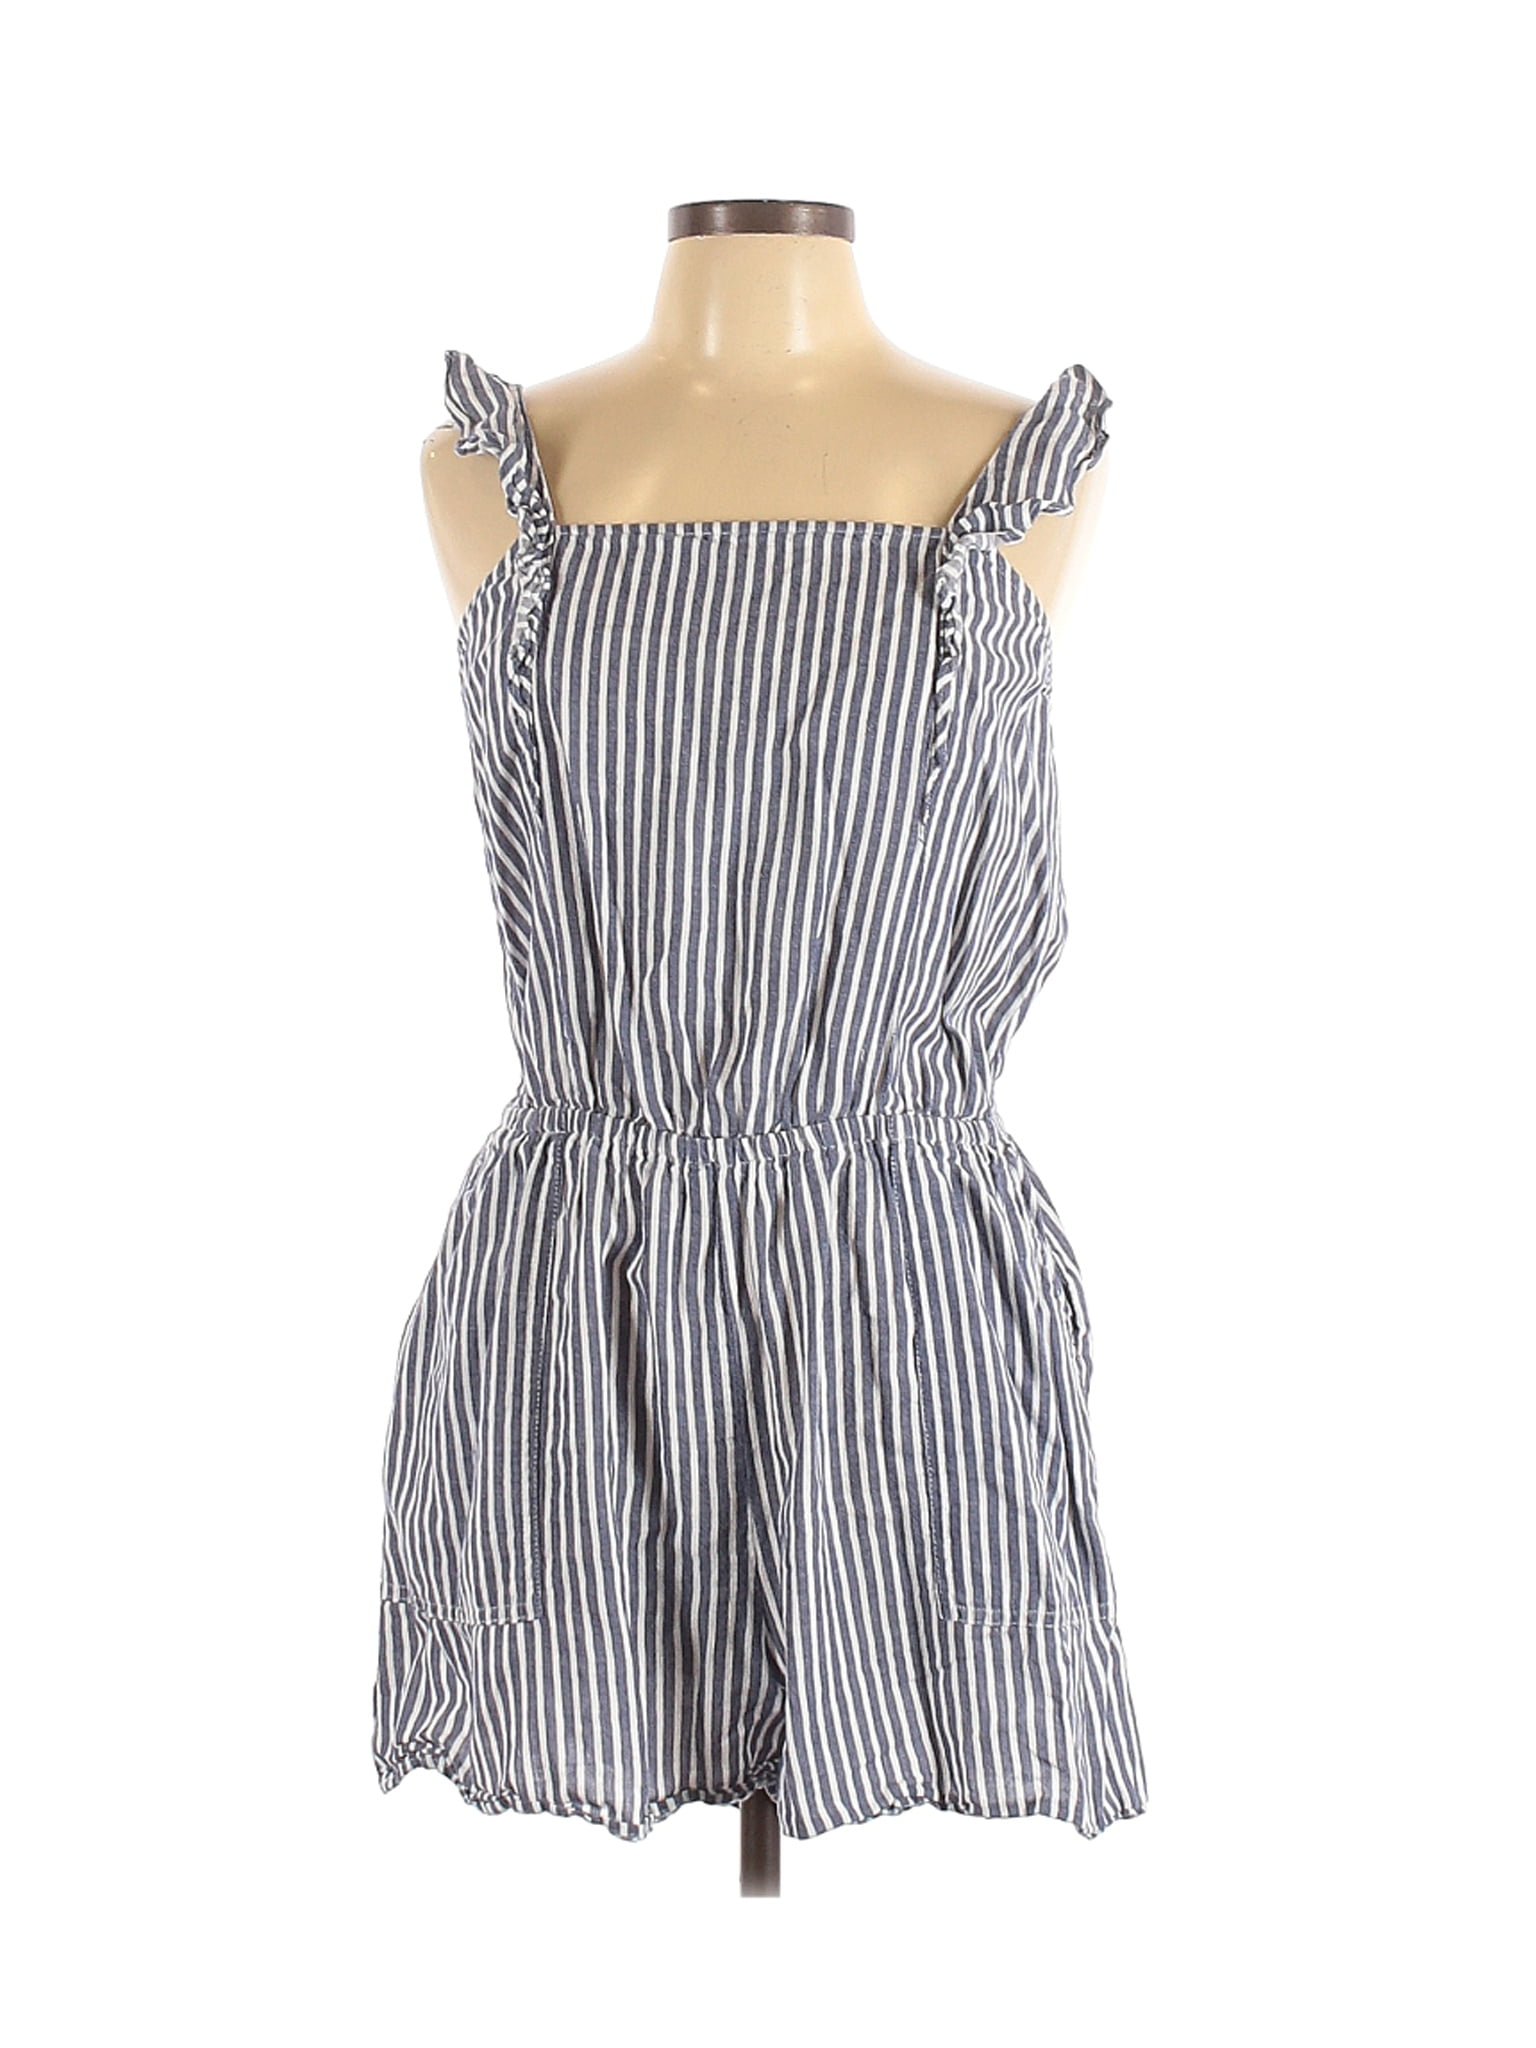 Old Navy - Pre-Owned Old Navy Women's Size L Romper - Walmart.com ...